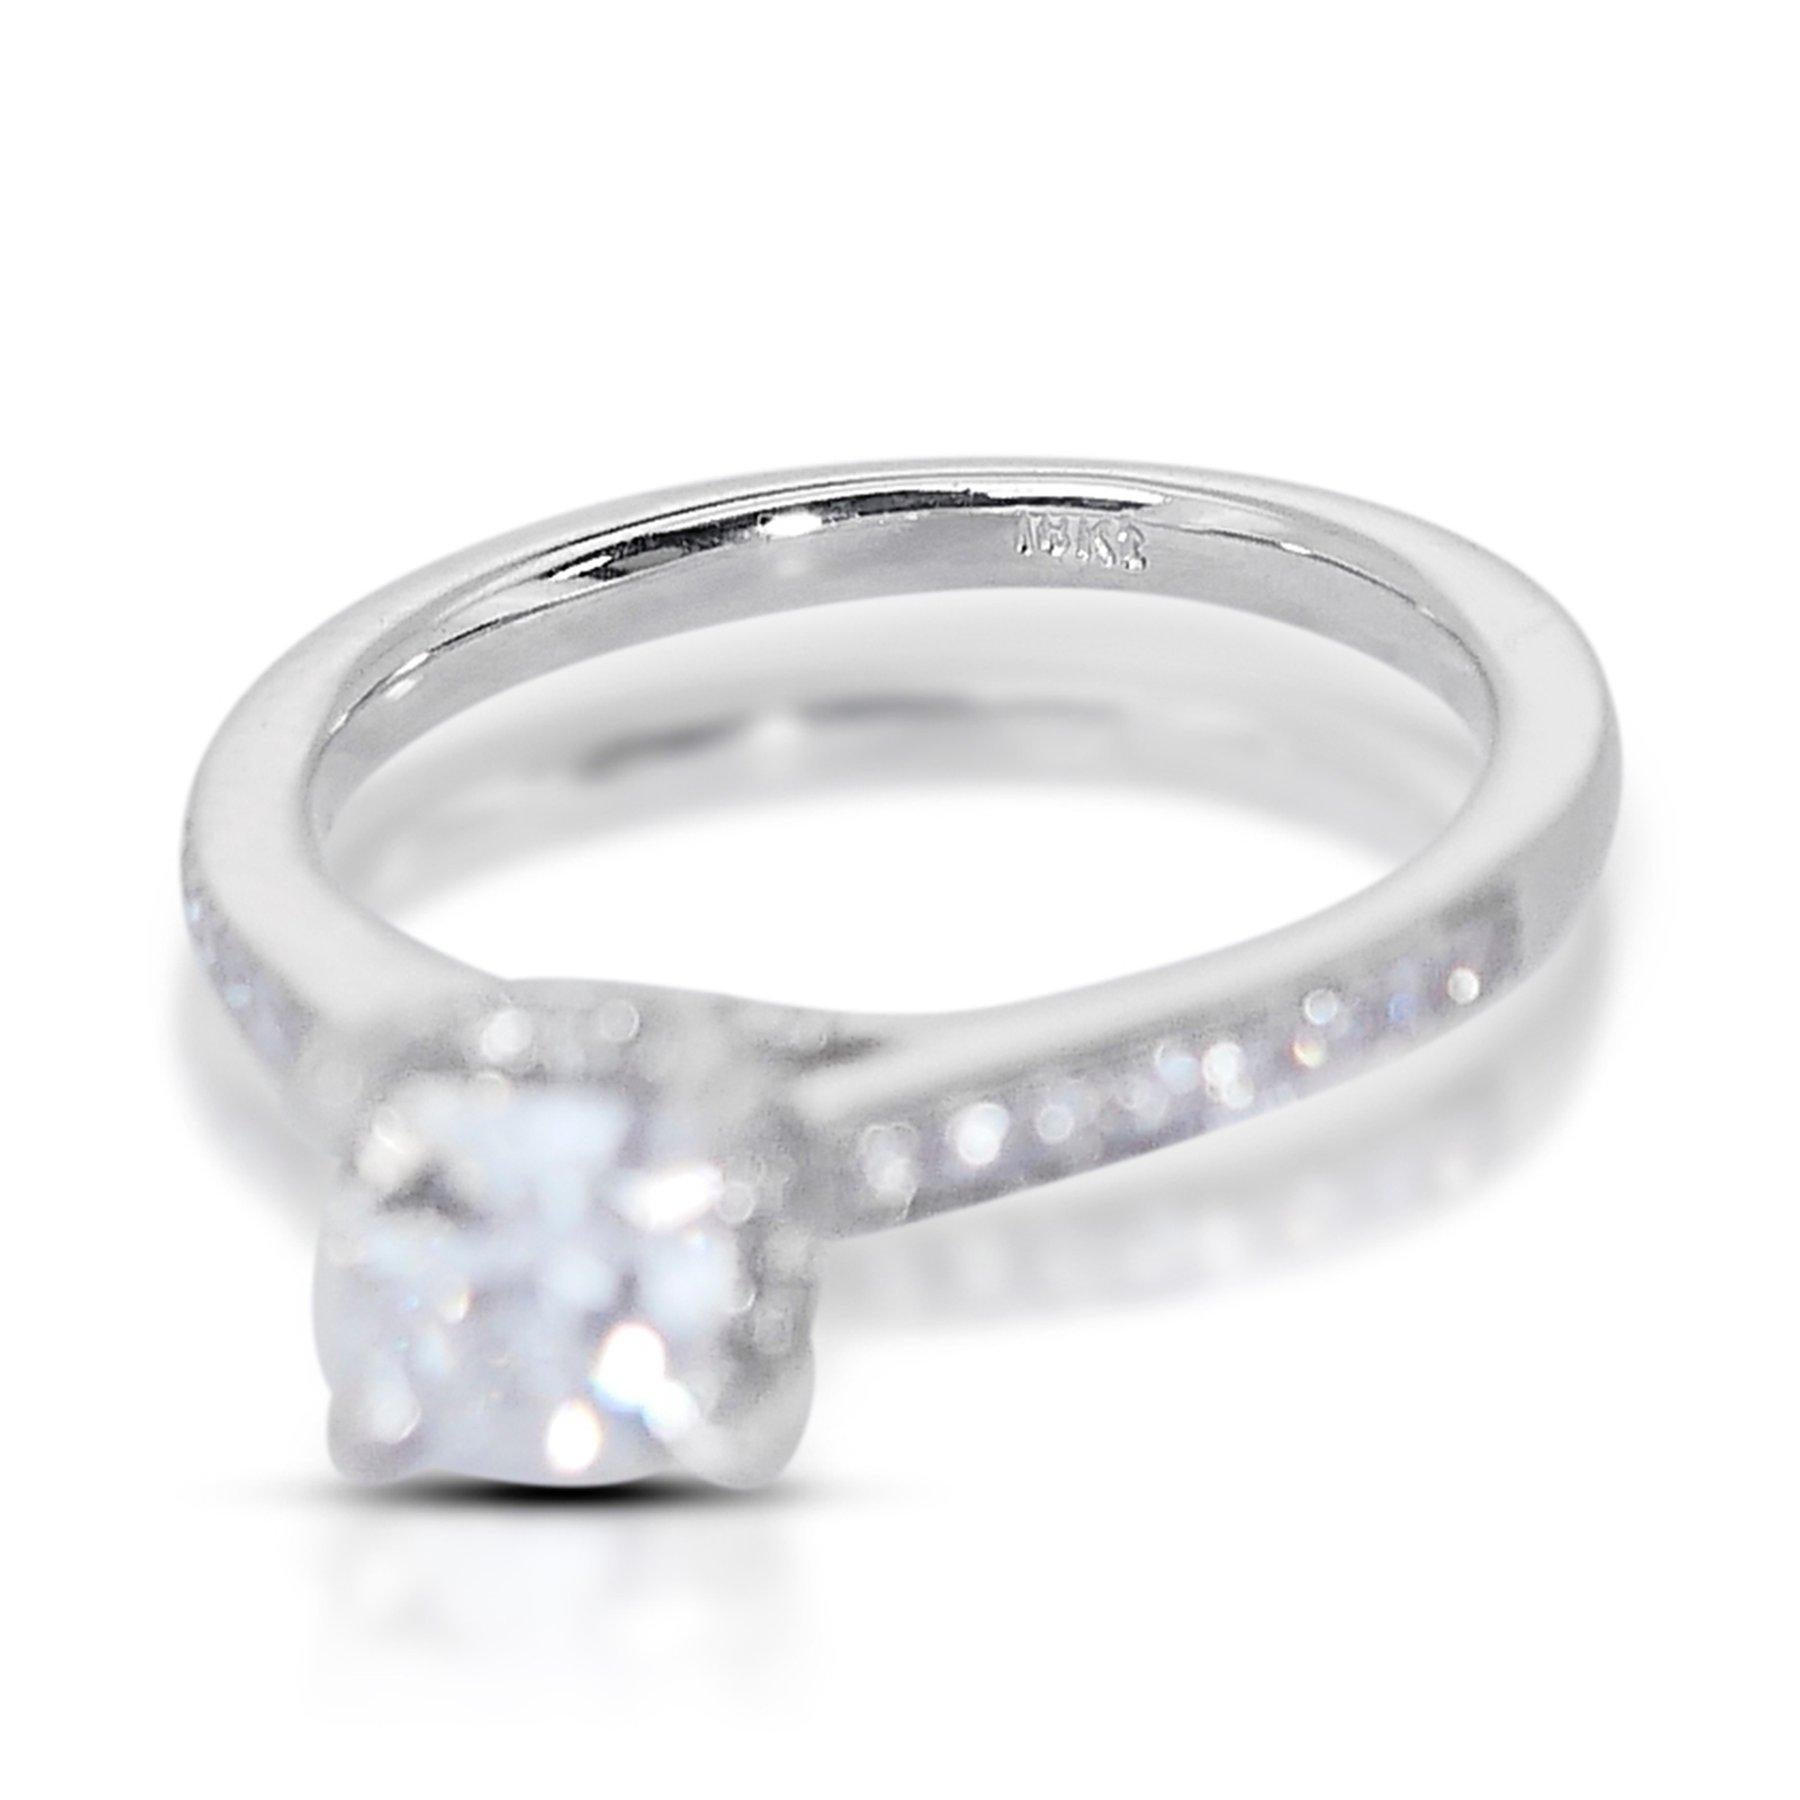 Glamorous 0.87ct Halo Diamond Ring in 18K White Gold For Sale 1